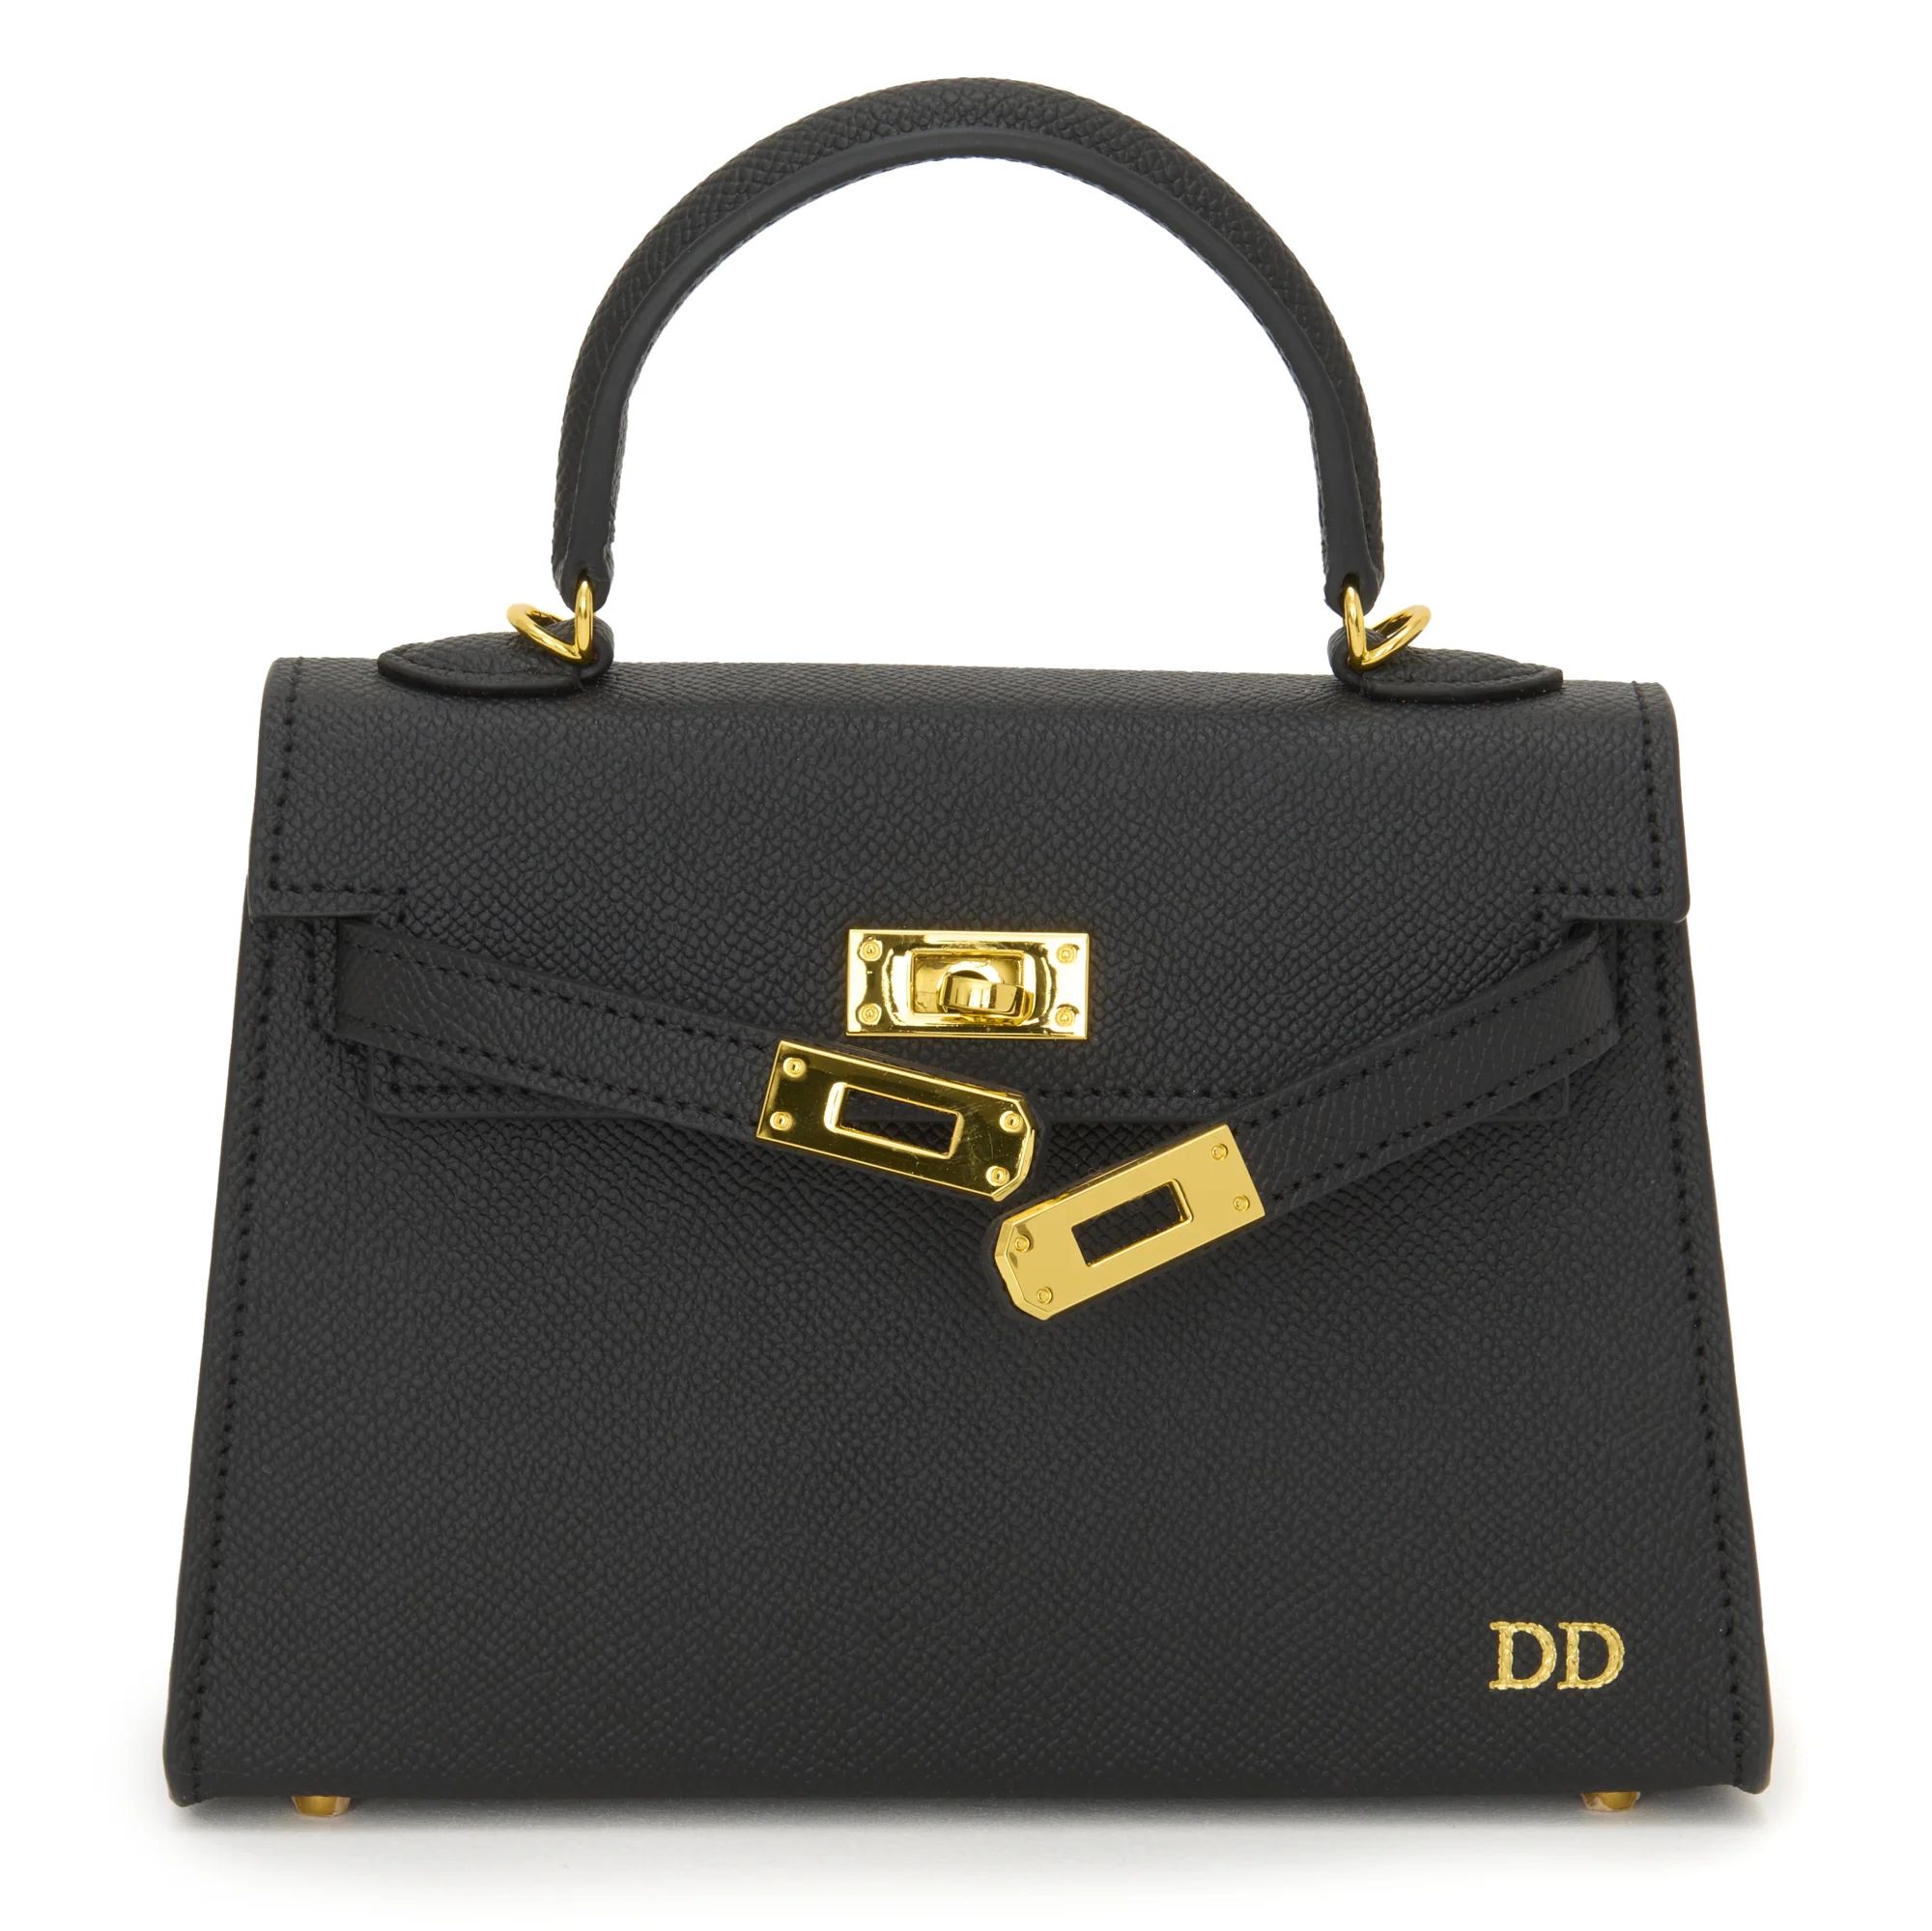 Lily and Bean Hettie Mini Bag - Black with Initials and Leather Strap | Lily and Bean